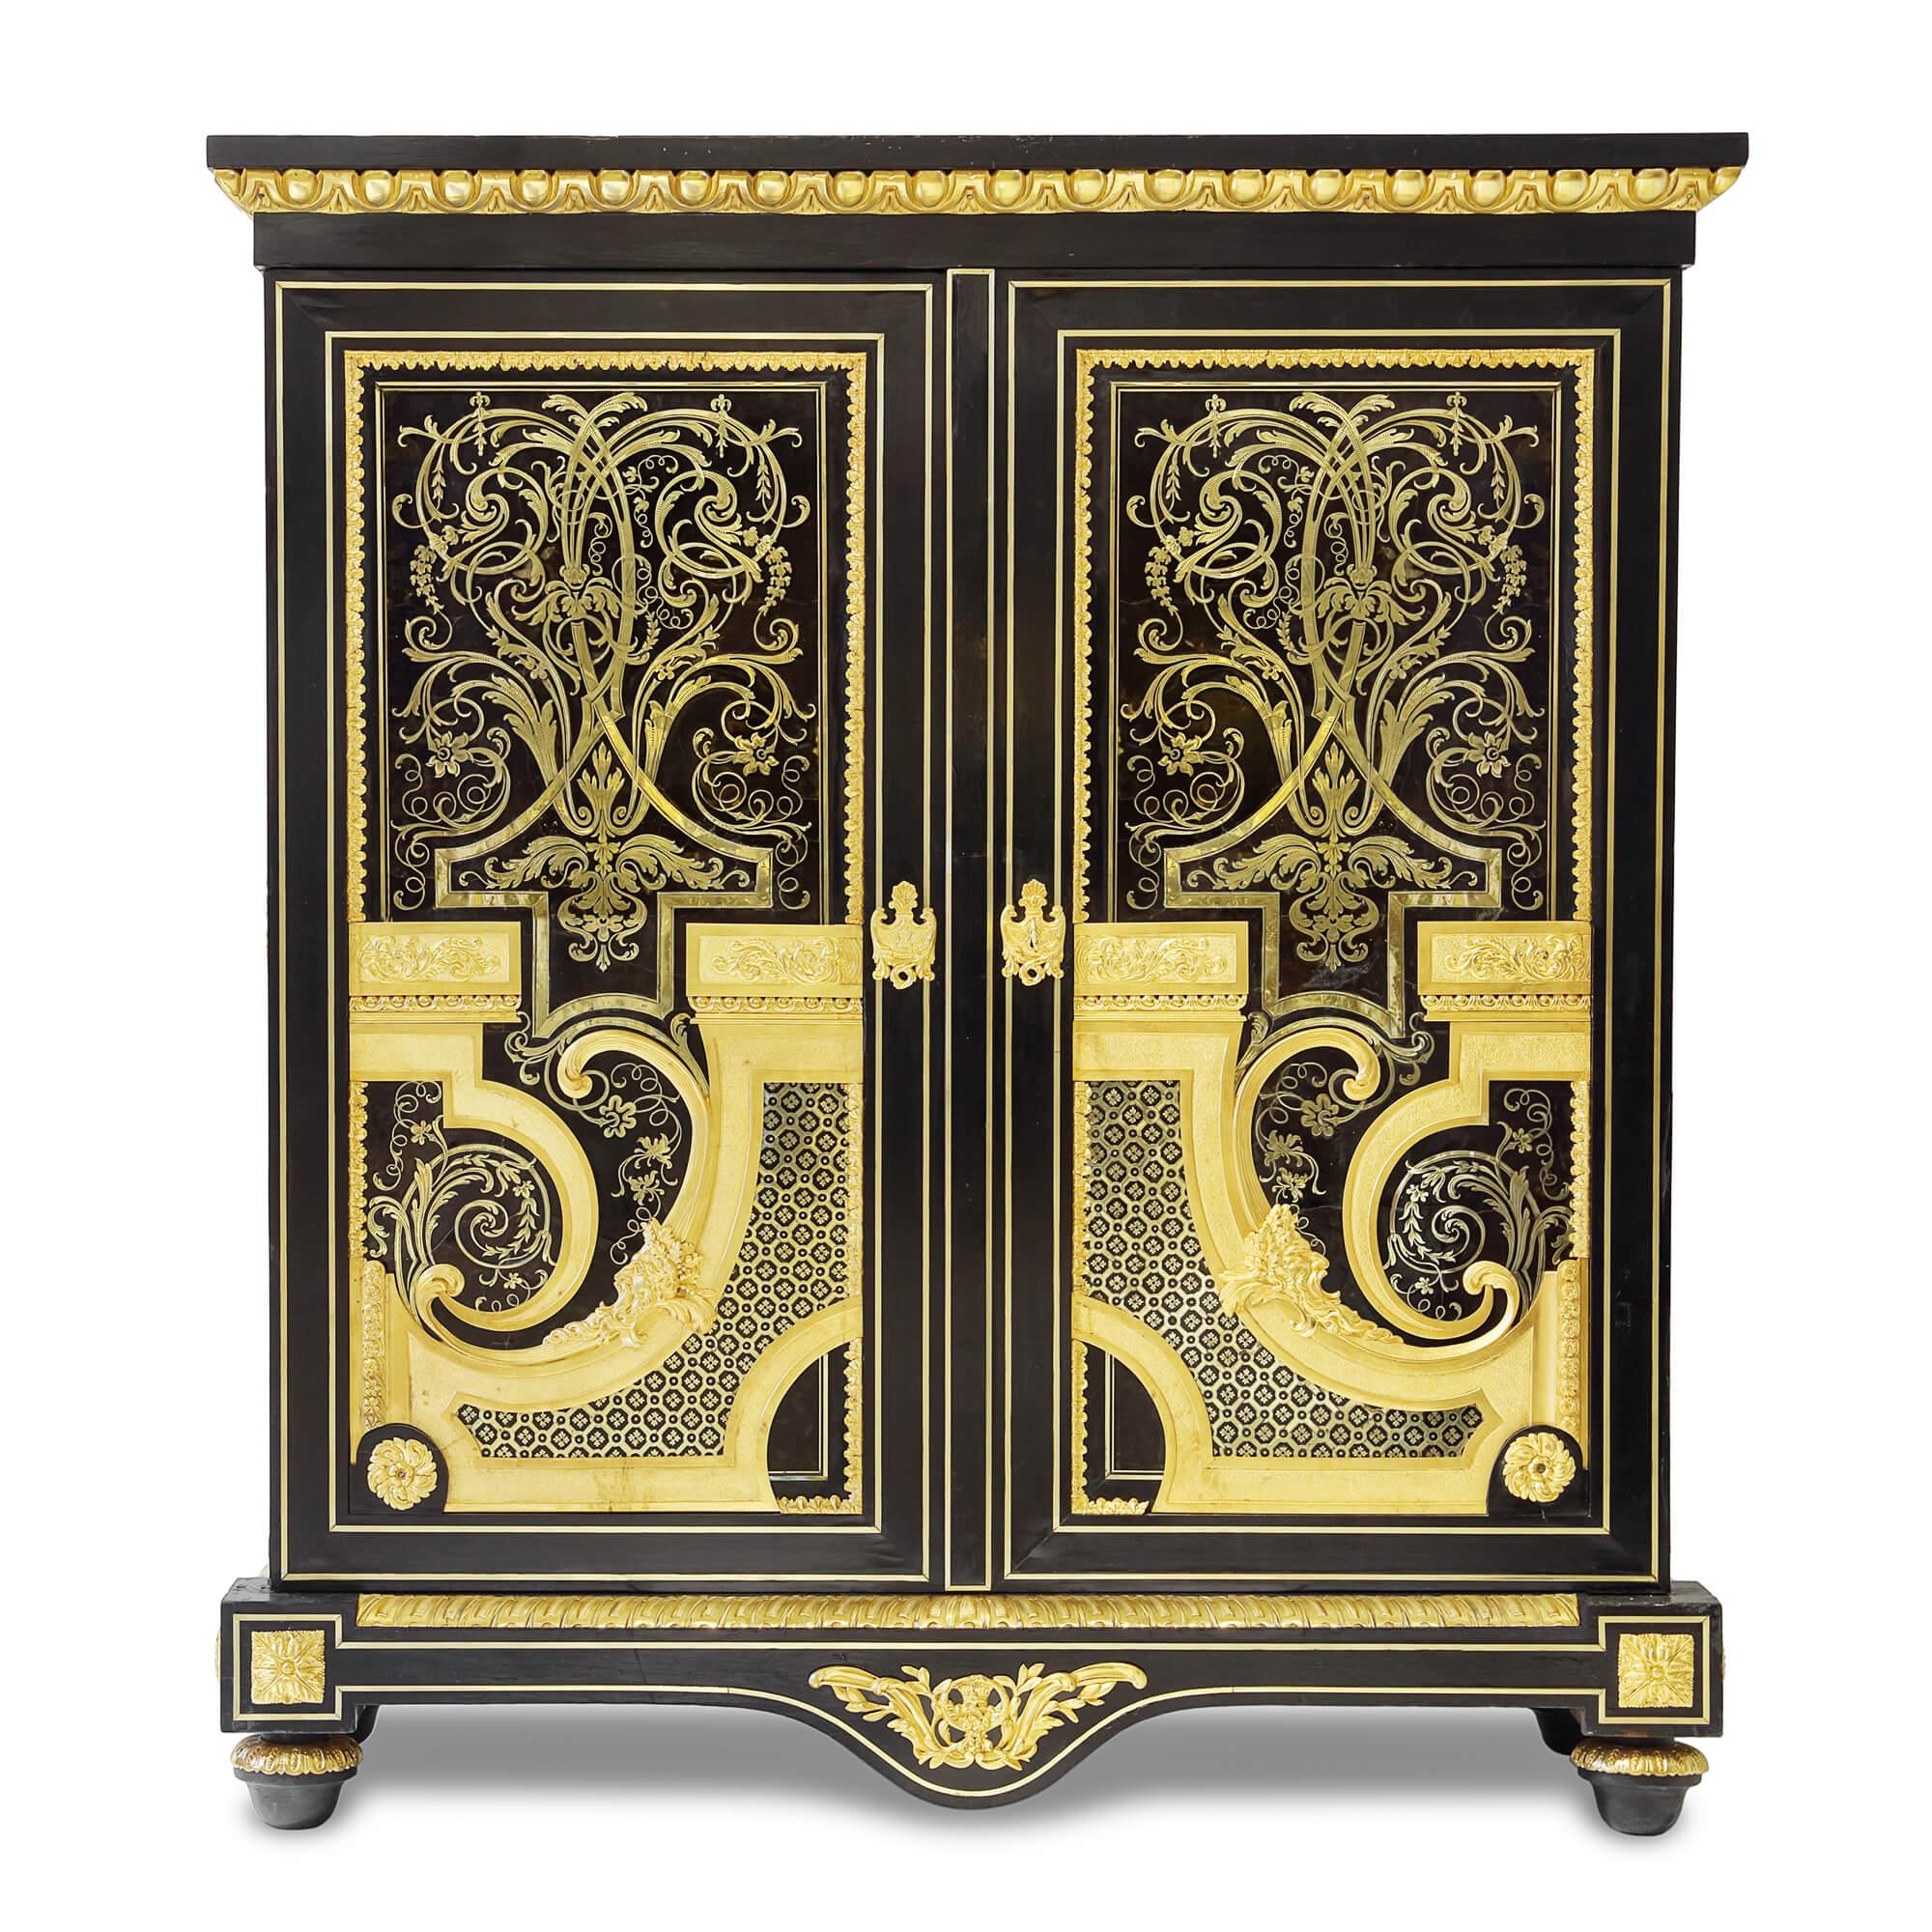 Brass and tortoiseshell inlaid Boulle style ebonised wood cabinets
French, late 19th Century
Height 142cm, width 127.5cm, depth 49.5cm

The magnificent cabinets in this pair are crafted in the style of André-Charles Boulle, an ébéniste who